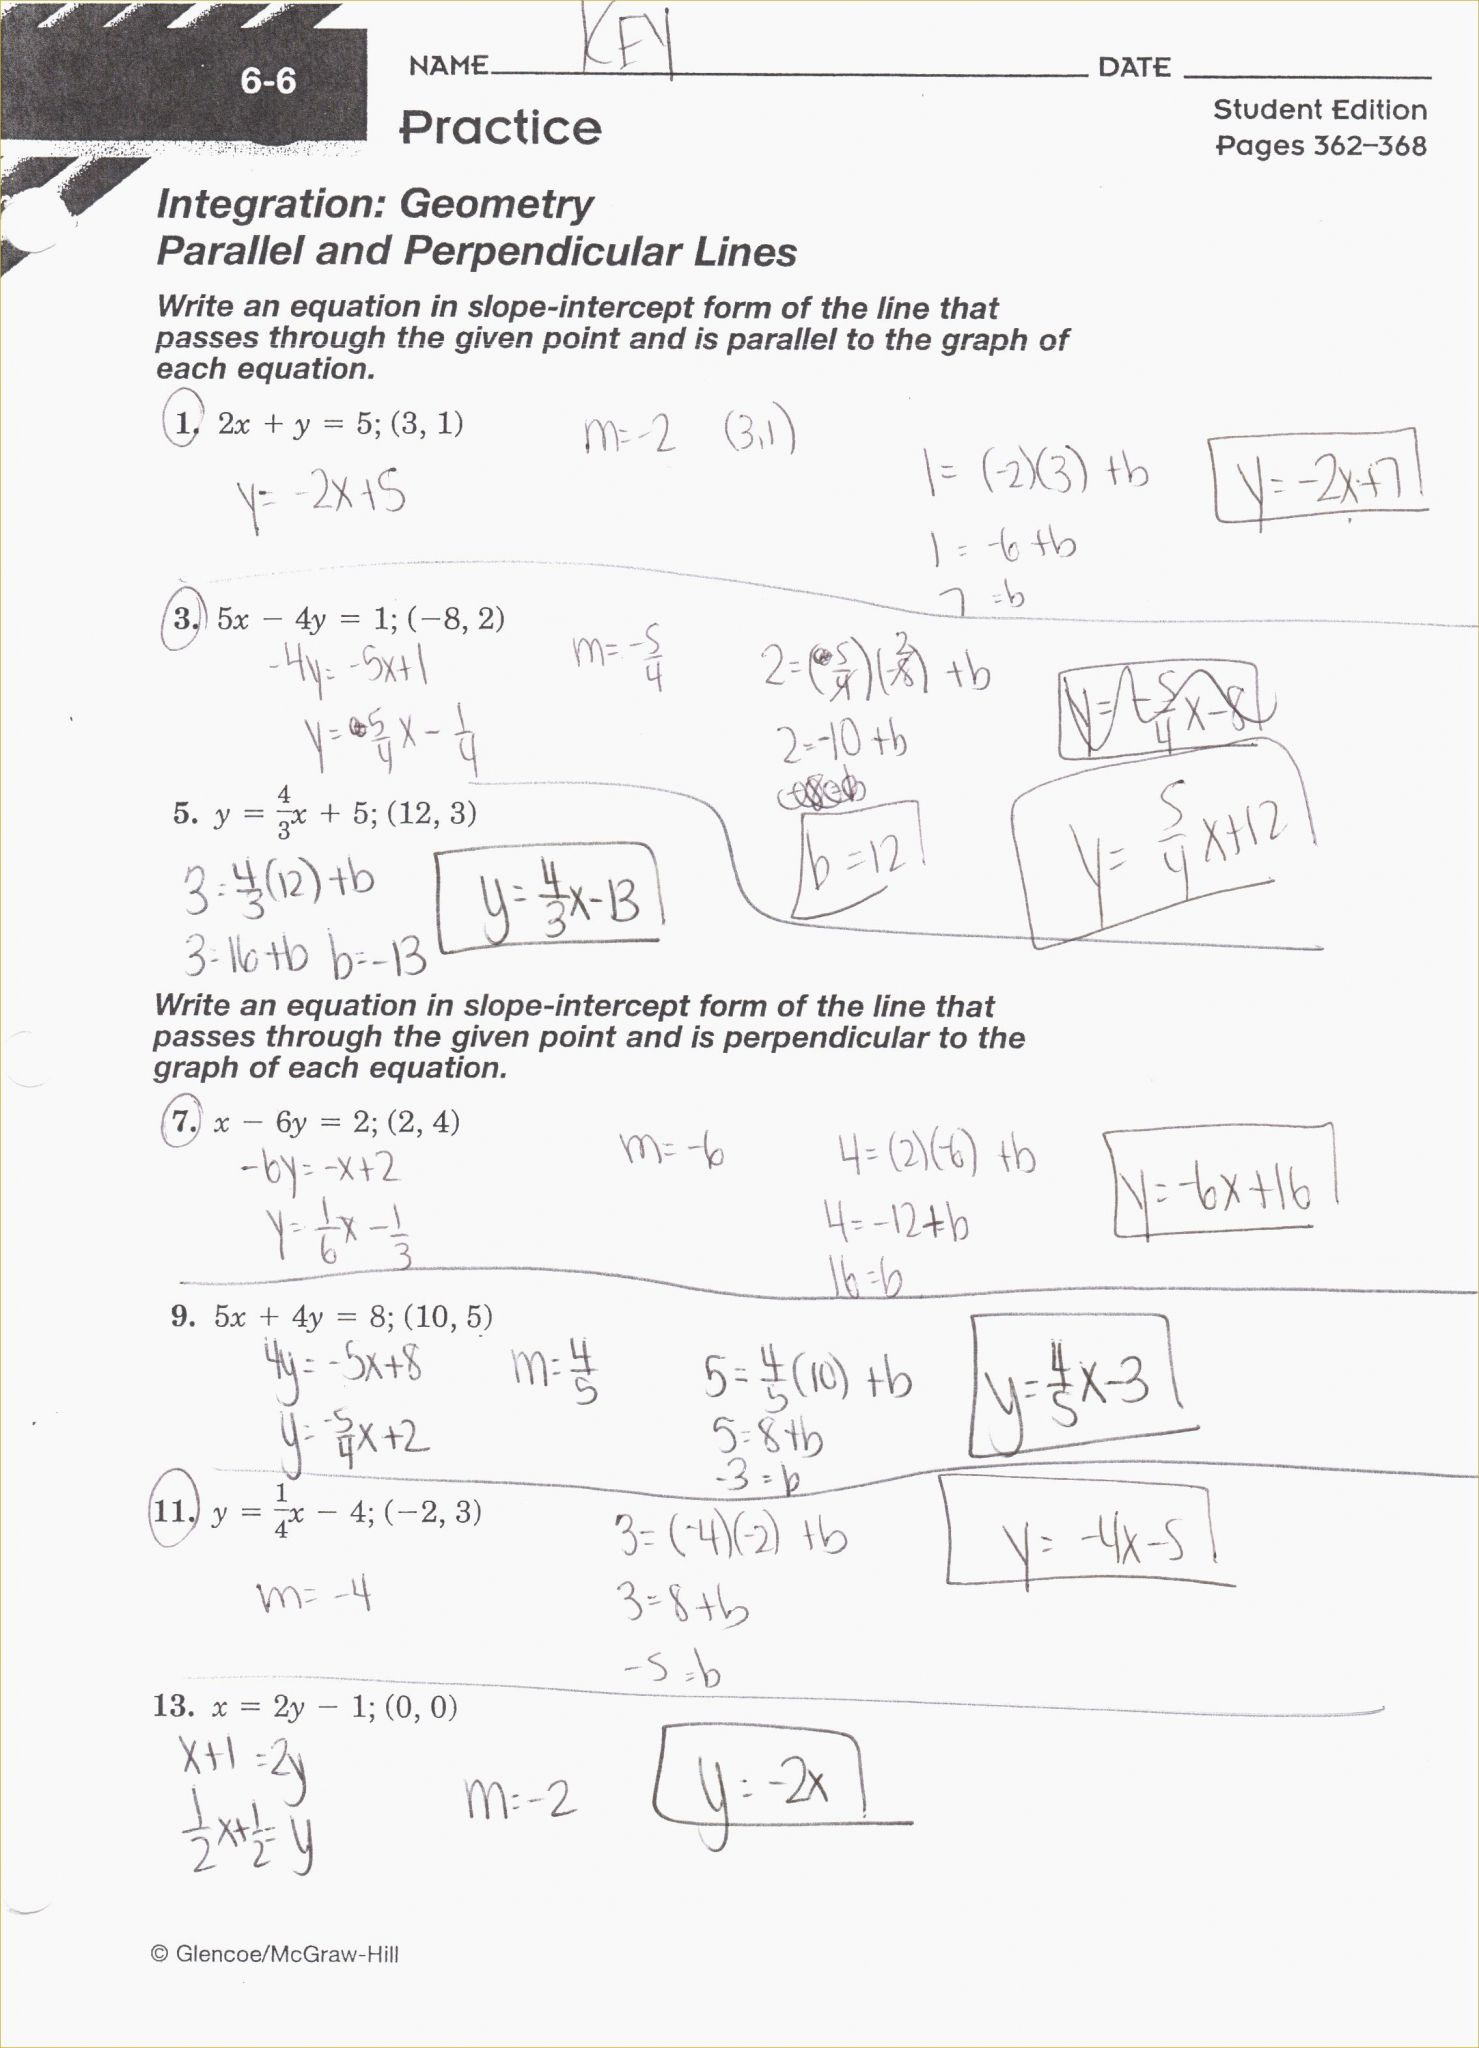 Parallel Lines Worksheet Answers